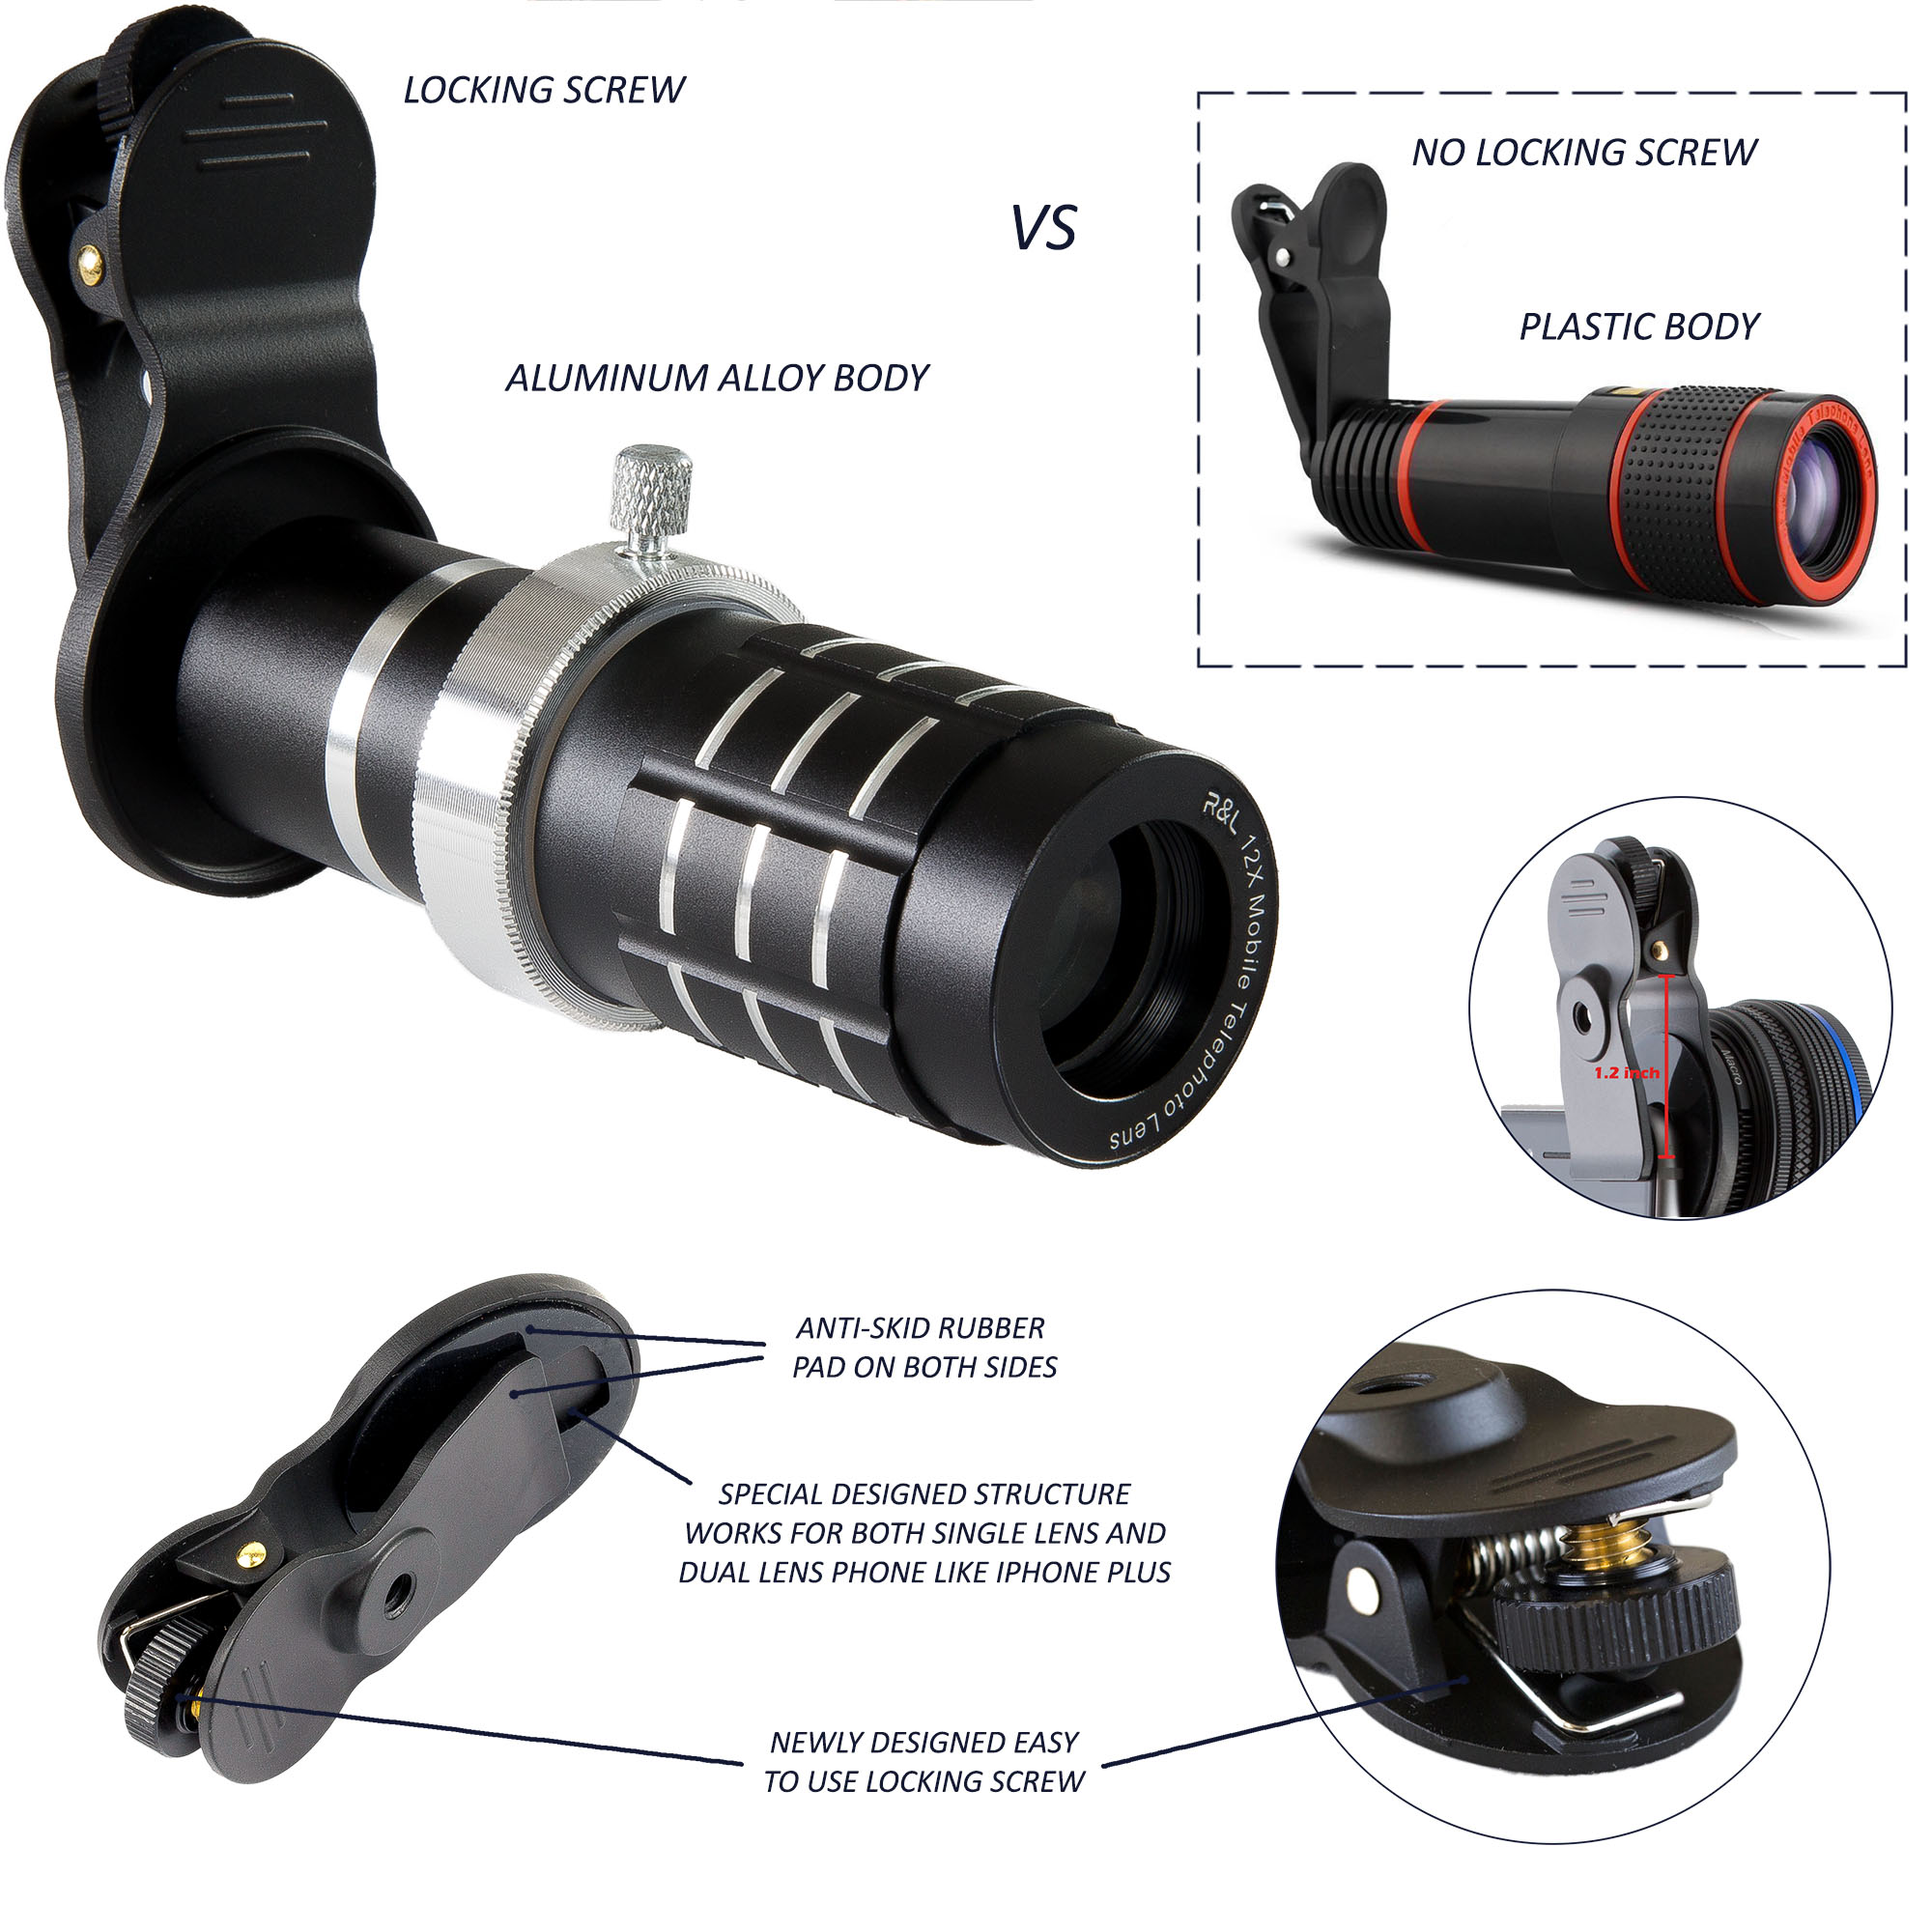 R&L Telephoto Lens for Smartphone, Mobile Camera Kit with 12X Telephoto, Wide Angle and Macro Lenses 3 in 1 - image 5 of 7